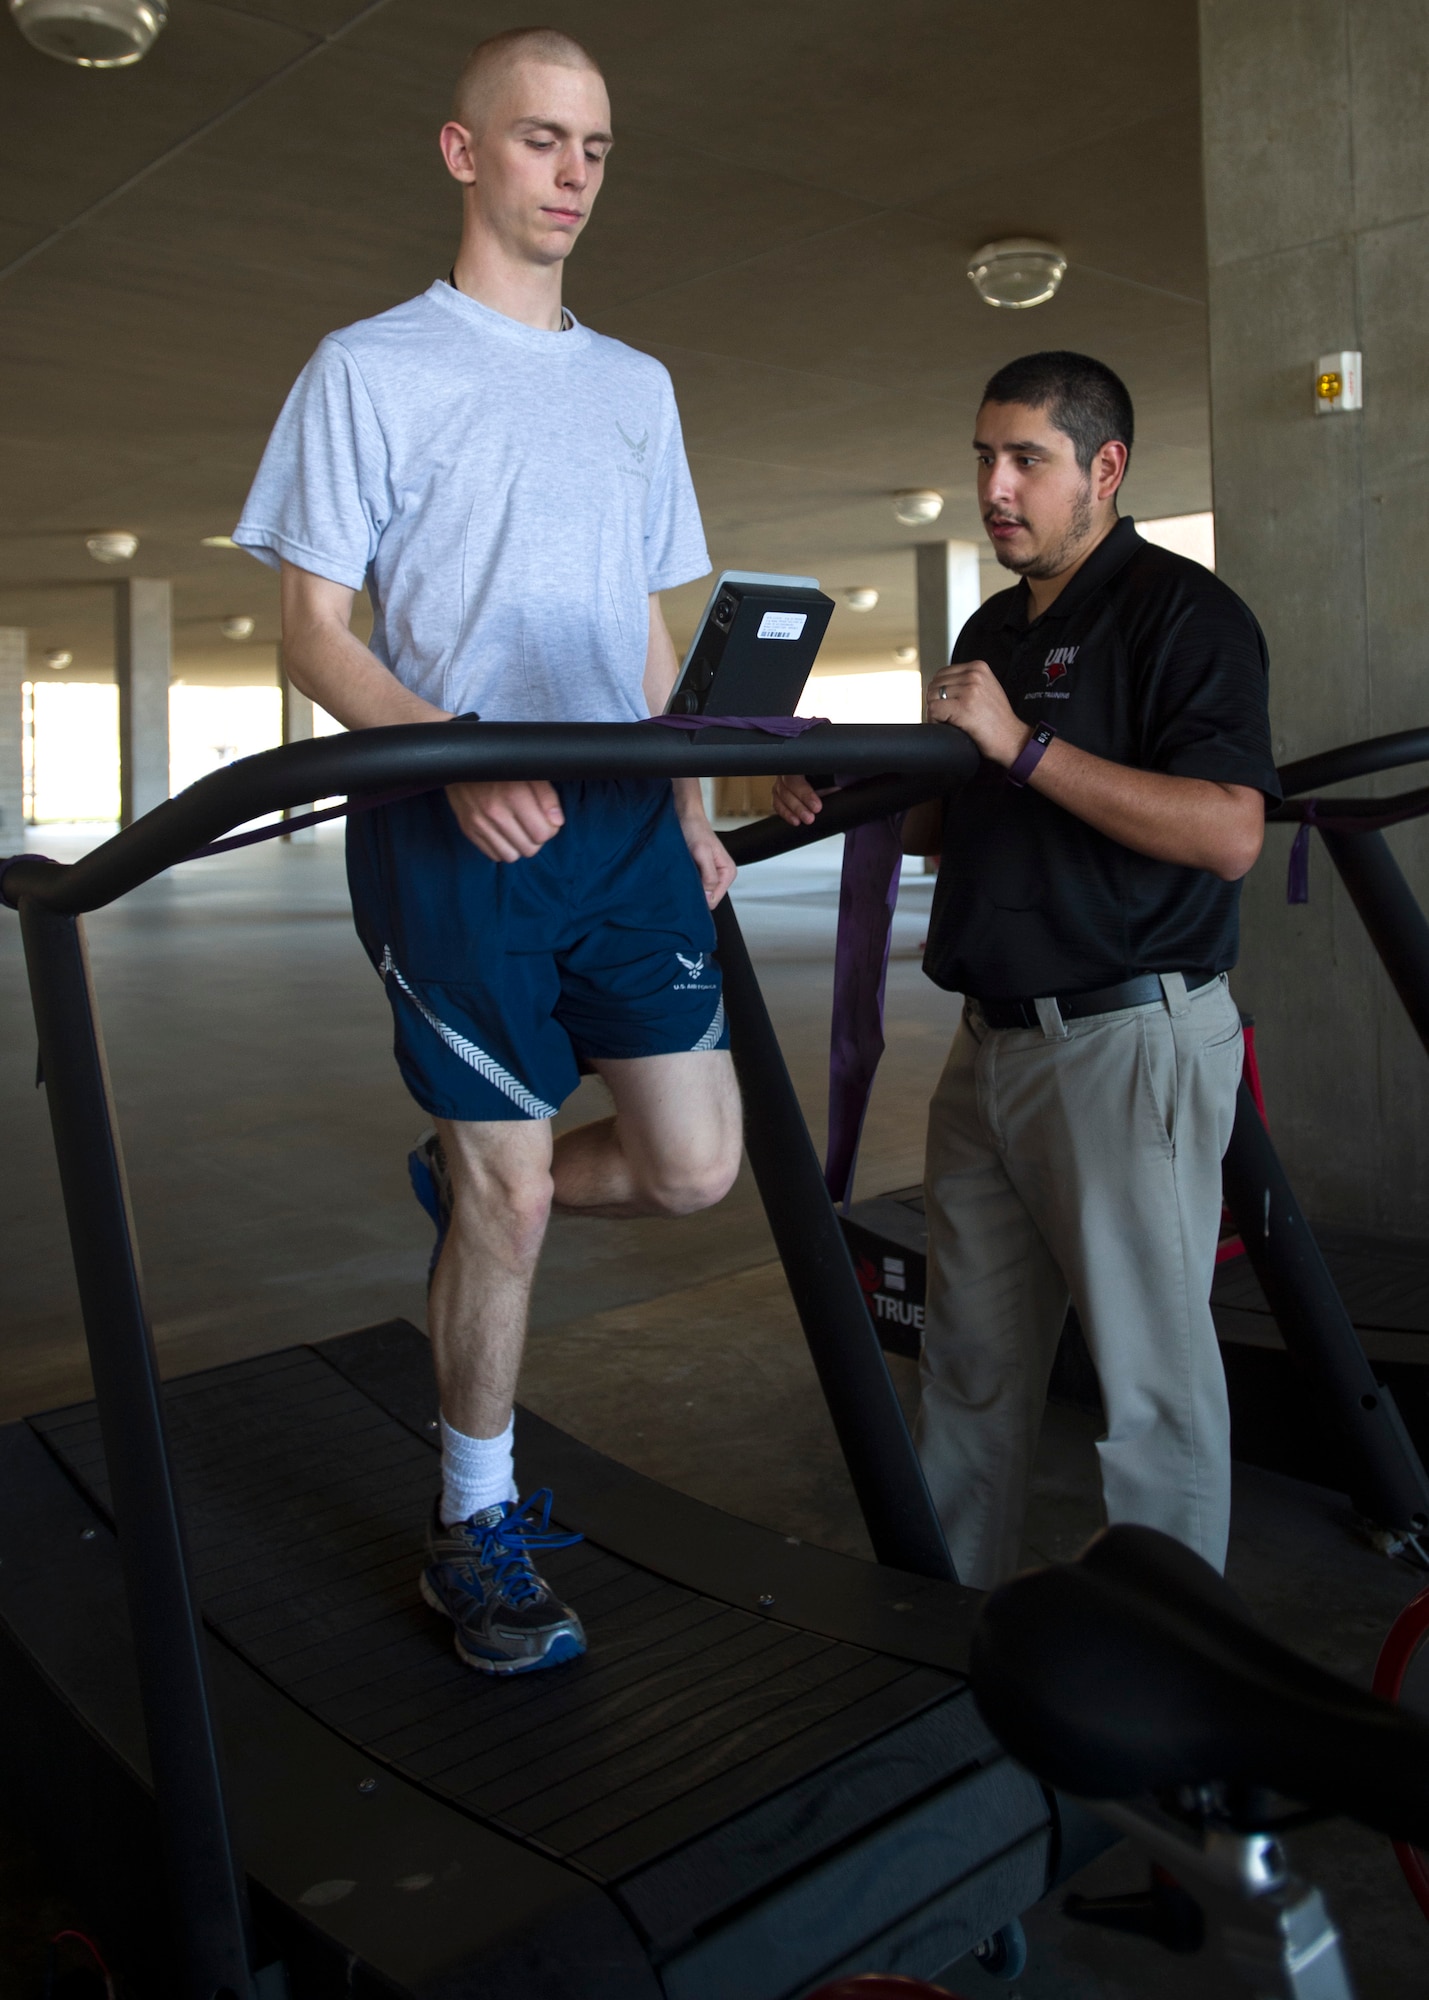 Arnoldo Gonzalez, an athletic trainer embedded with the 559th Medical Group’s VIPER Clinic, assesses trainee Alec Sollars on a trueform treadmill at the 559th MDG VIPER Clinic on Joint Base San Antonio-Lackland, Texas, Nov. 29. This treadmill is completely motorless and is uniquely designed so that it does not allow anyone to run on it with improper running form. This instant feedback tool that teaches trainees how to properly run and hopefully prevent any further injuries.